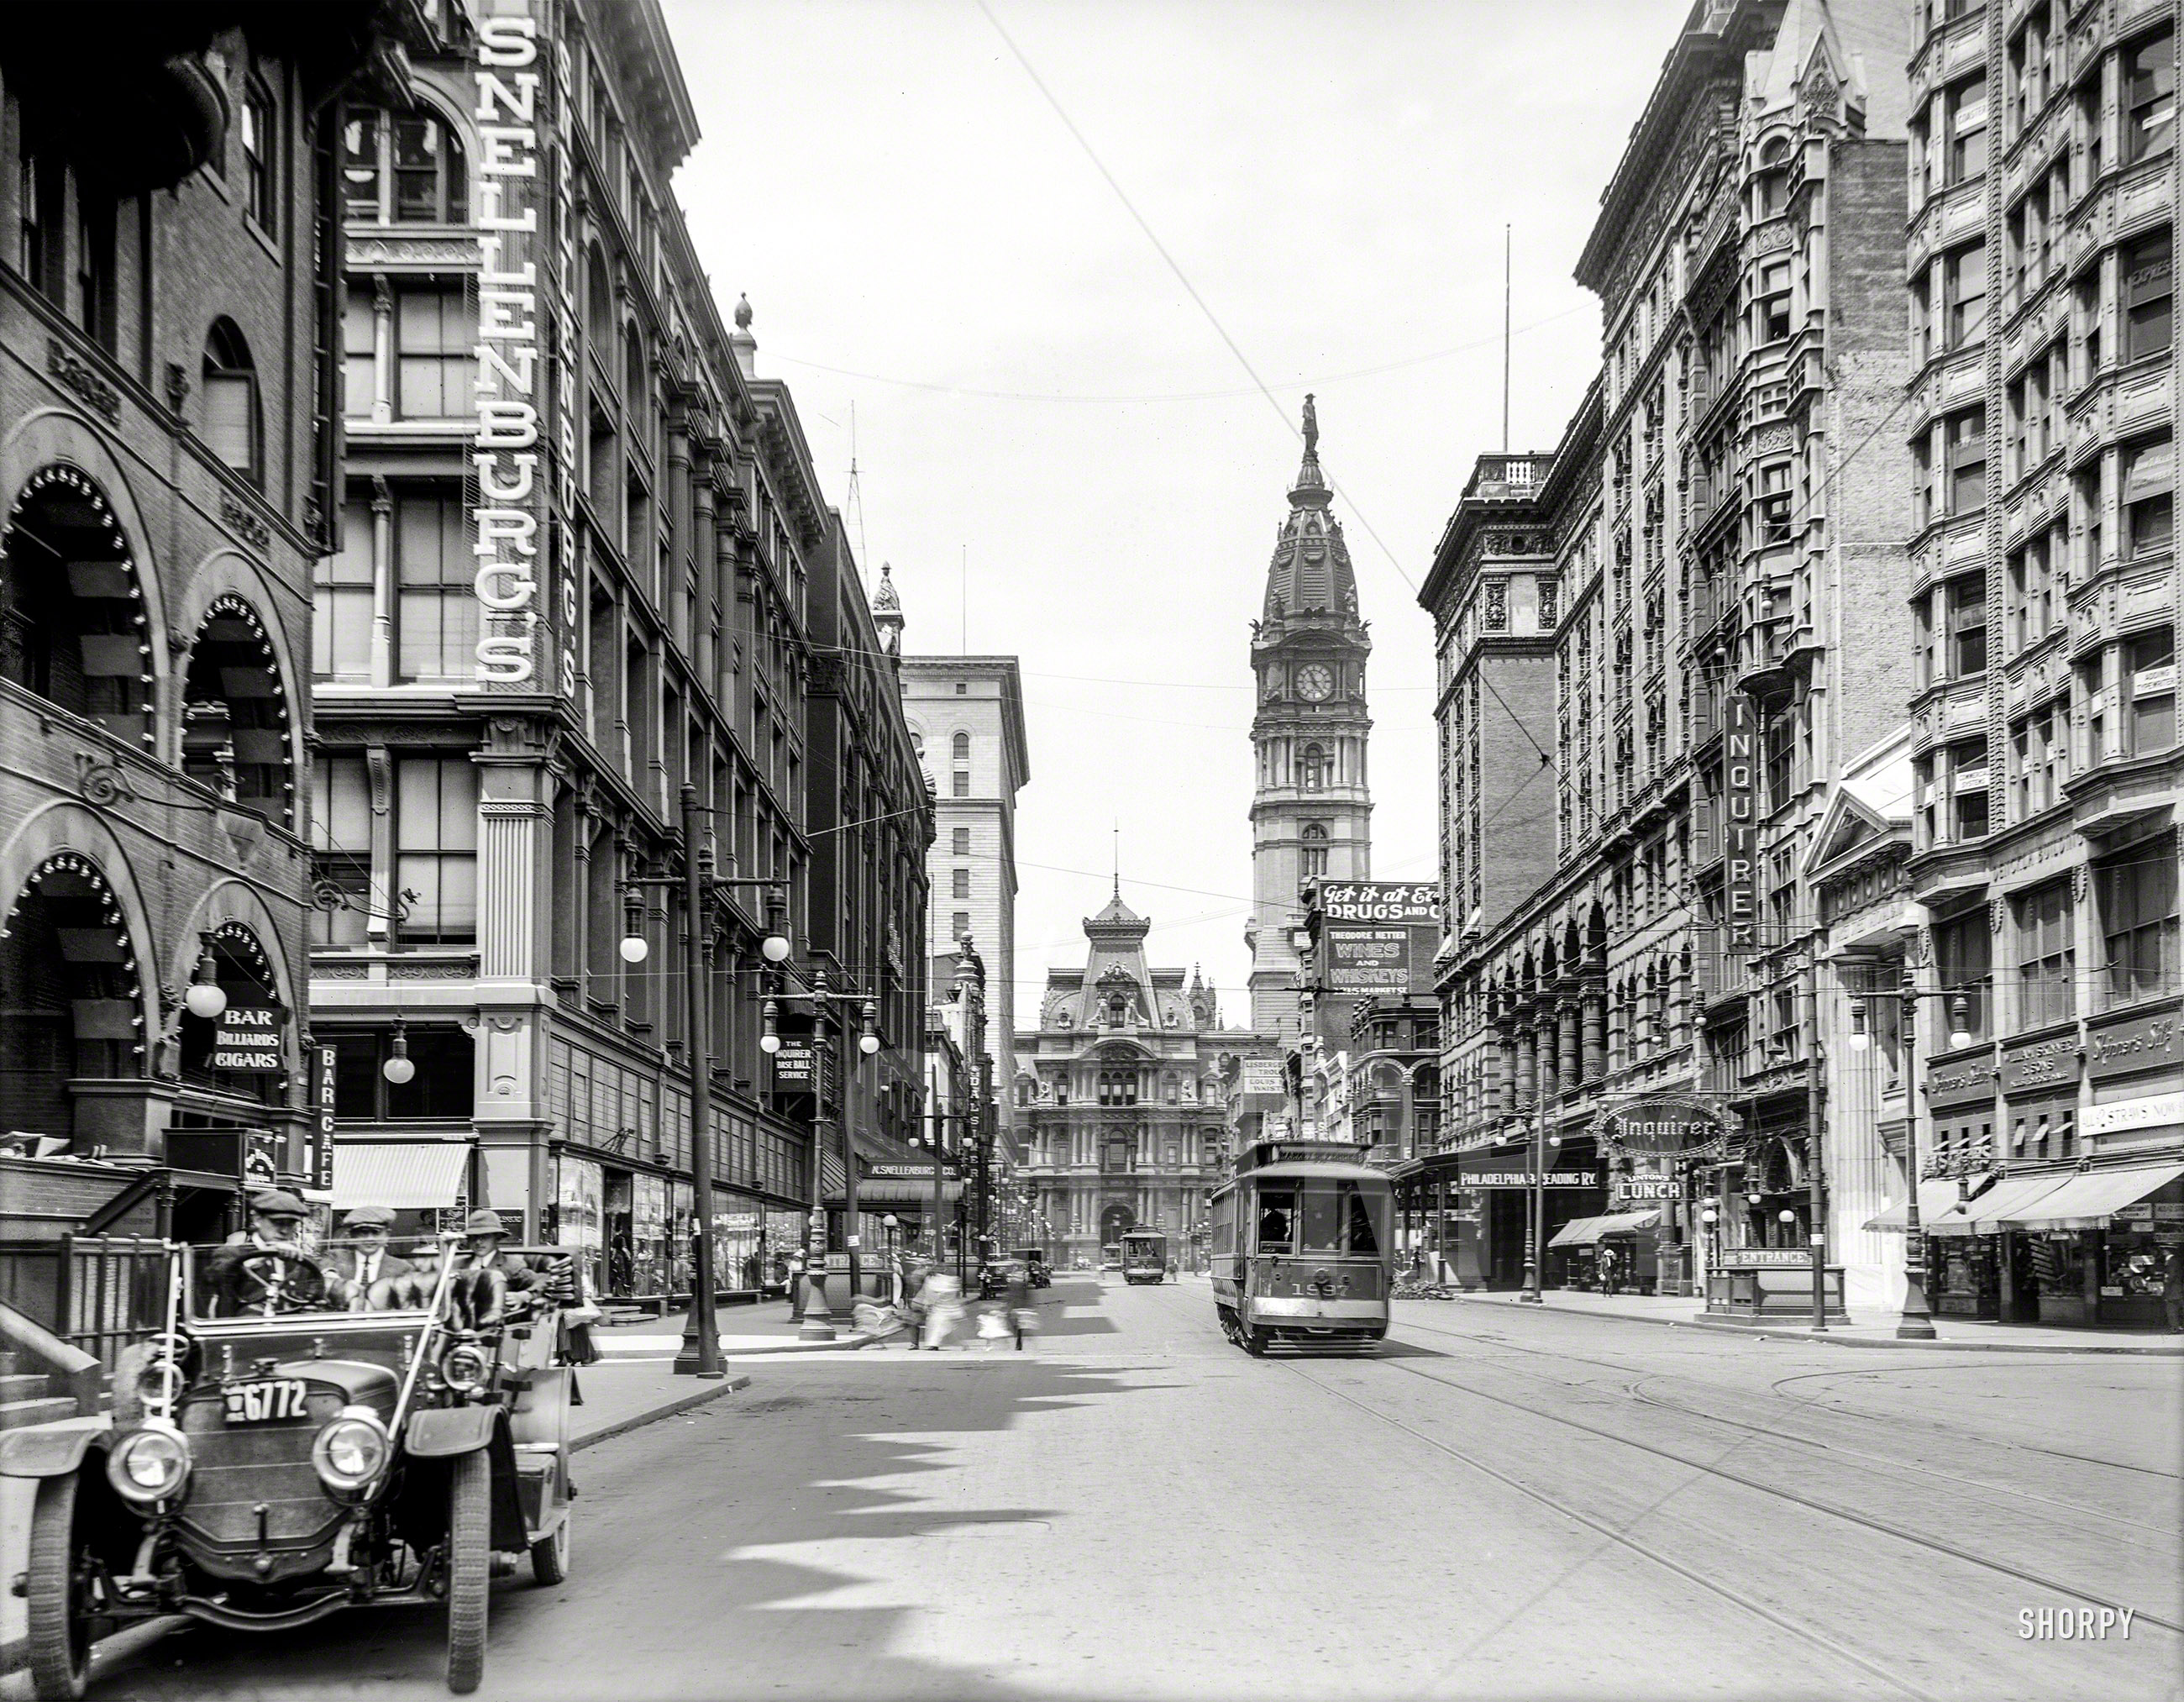 1912. "City Hall and Market Street west from 11th, Philadelphia." With a variety of interesting signage, including an electric baseball scoreboard at Snellenburg's department store. 8x10 inch glass negative. View full size.